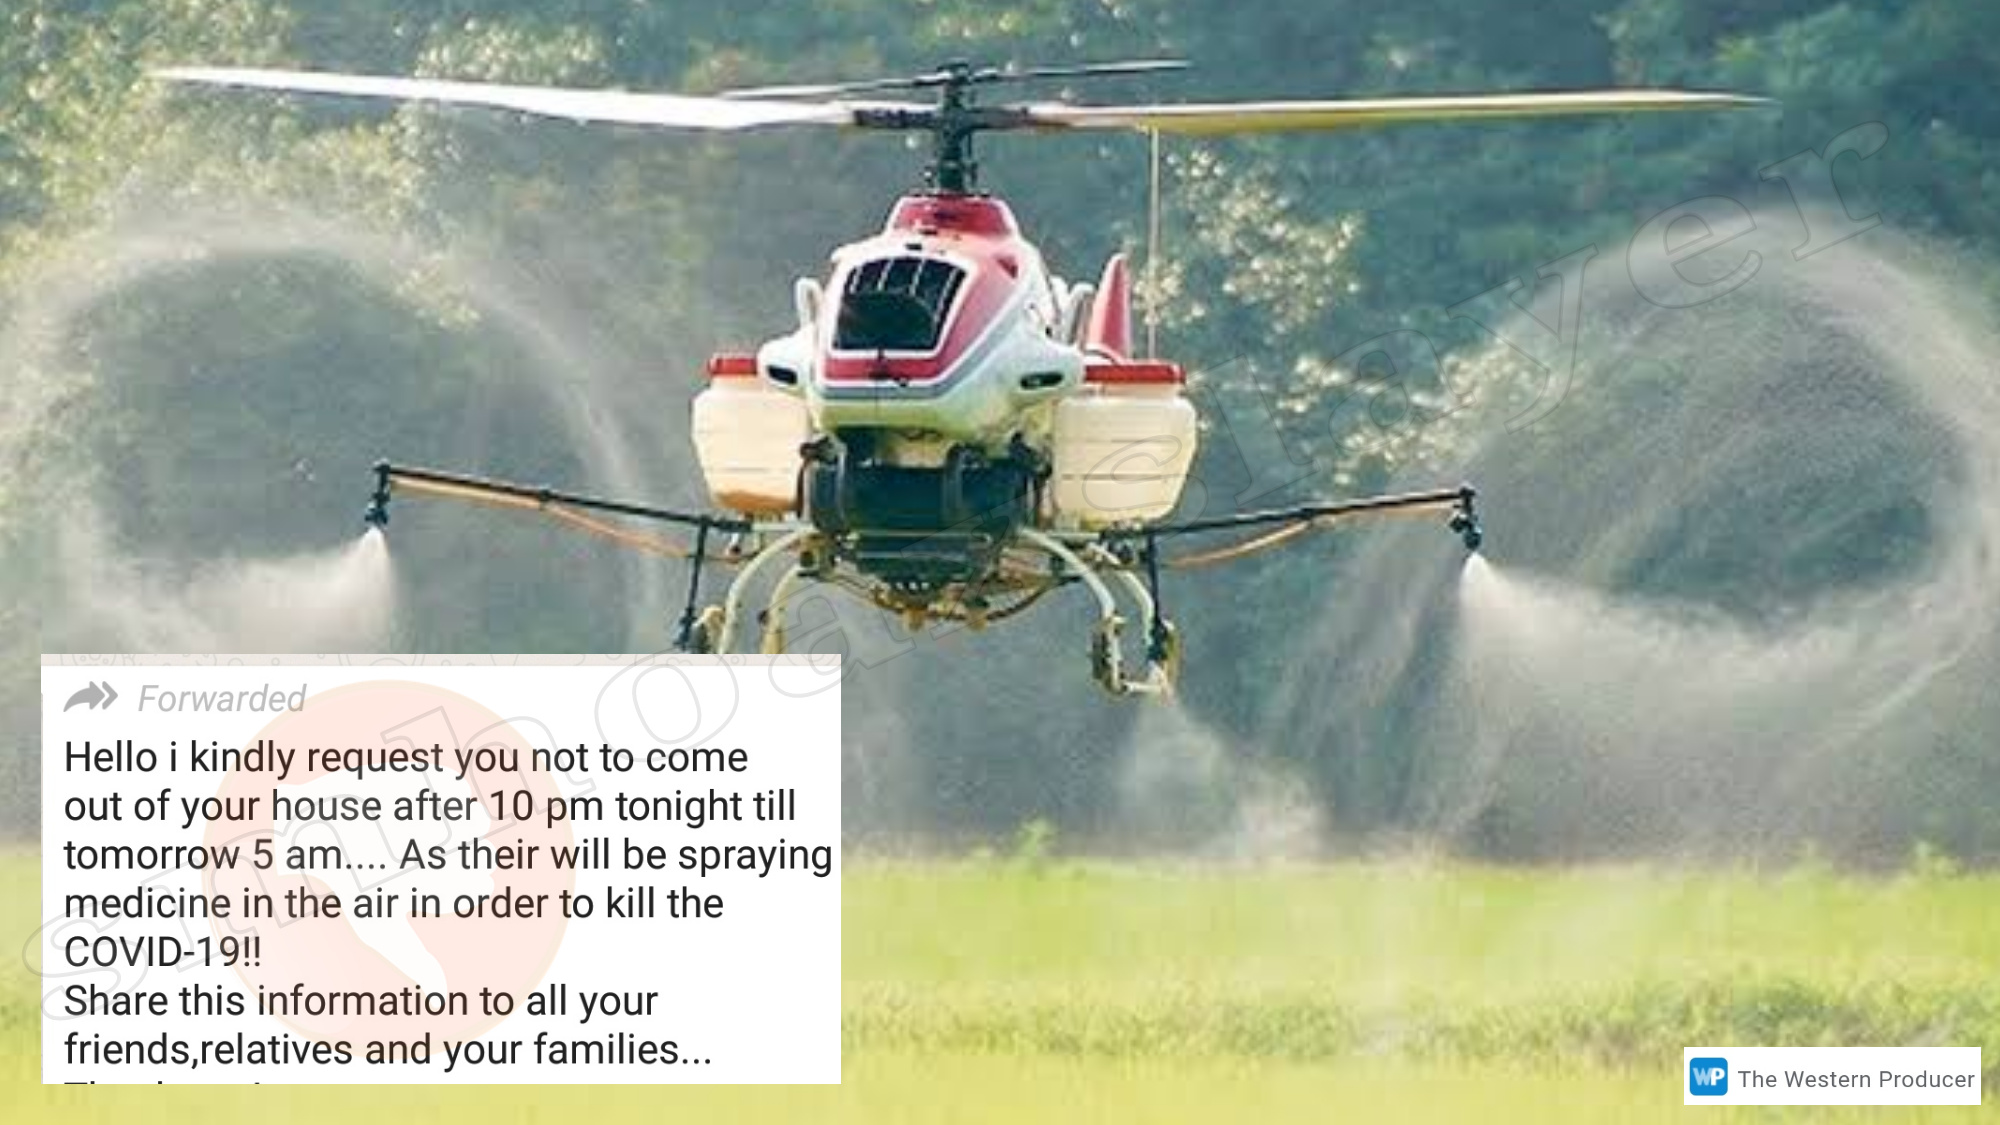 There won't be any medicine sprayed by Helicopters to kill COVID-19 . - Swachh Social Media Abhiyaan